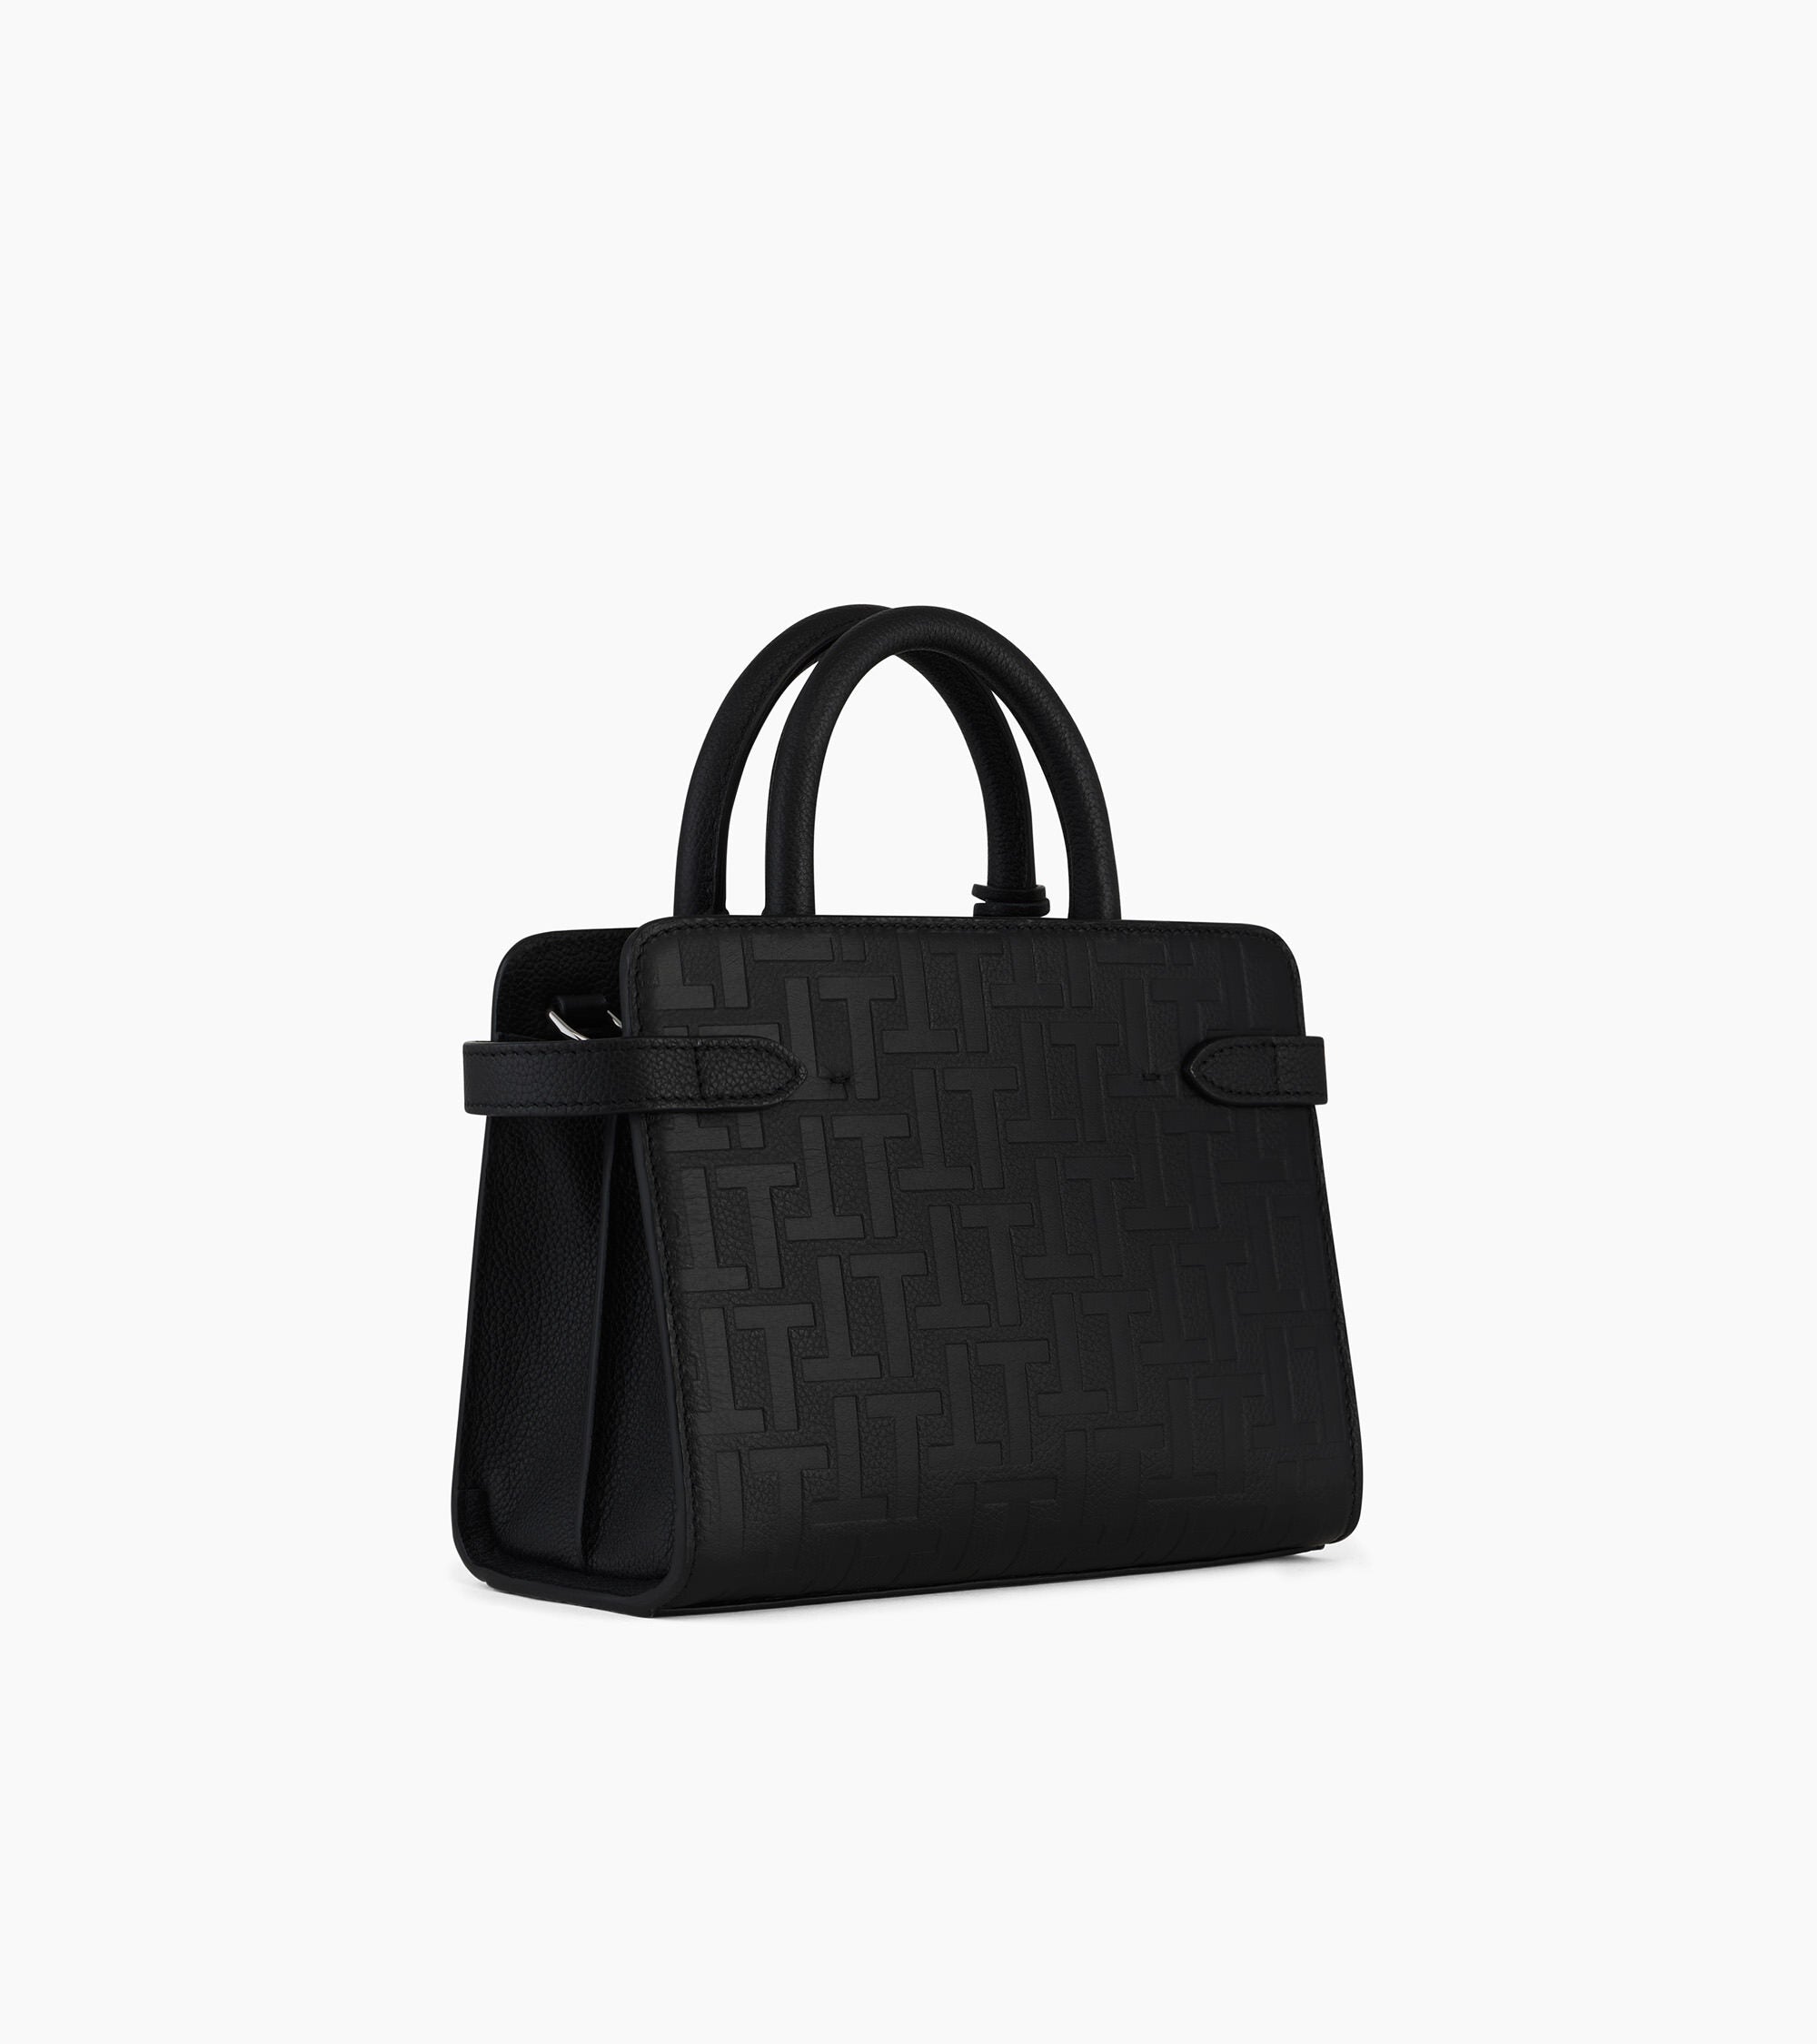 Emilie small handbag in embossed T leather